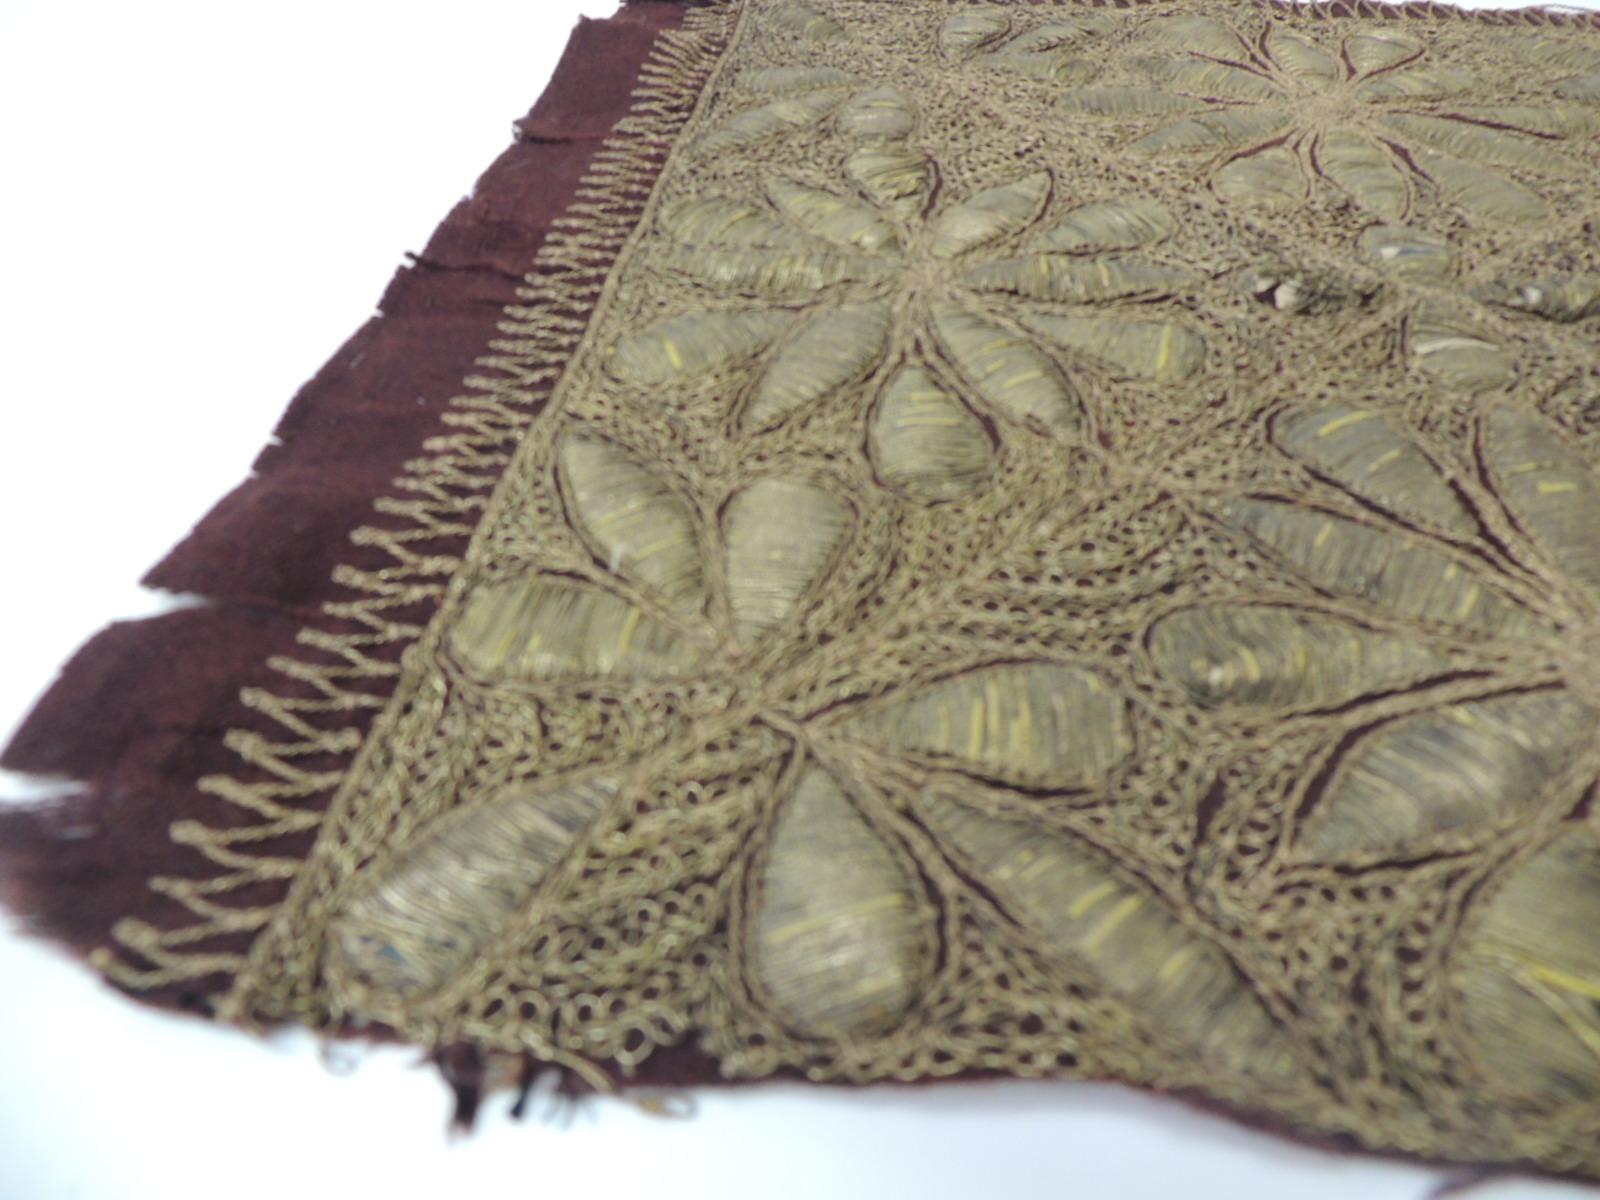 Antique Textile Collection:
19th c. Persian Ottoman Empire Gold Metallic Threads Embroidered Floral Textile on burgundy wool.
Ideal to frame it on a shadow box or made into a pillow.
Sold as is.
Size: 13. 3/4 x 15 W